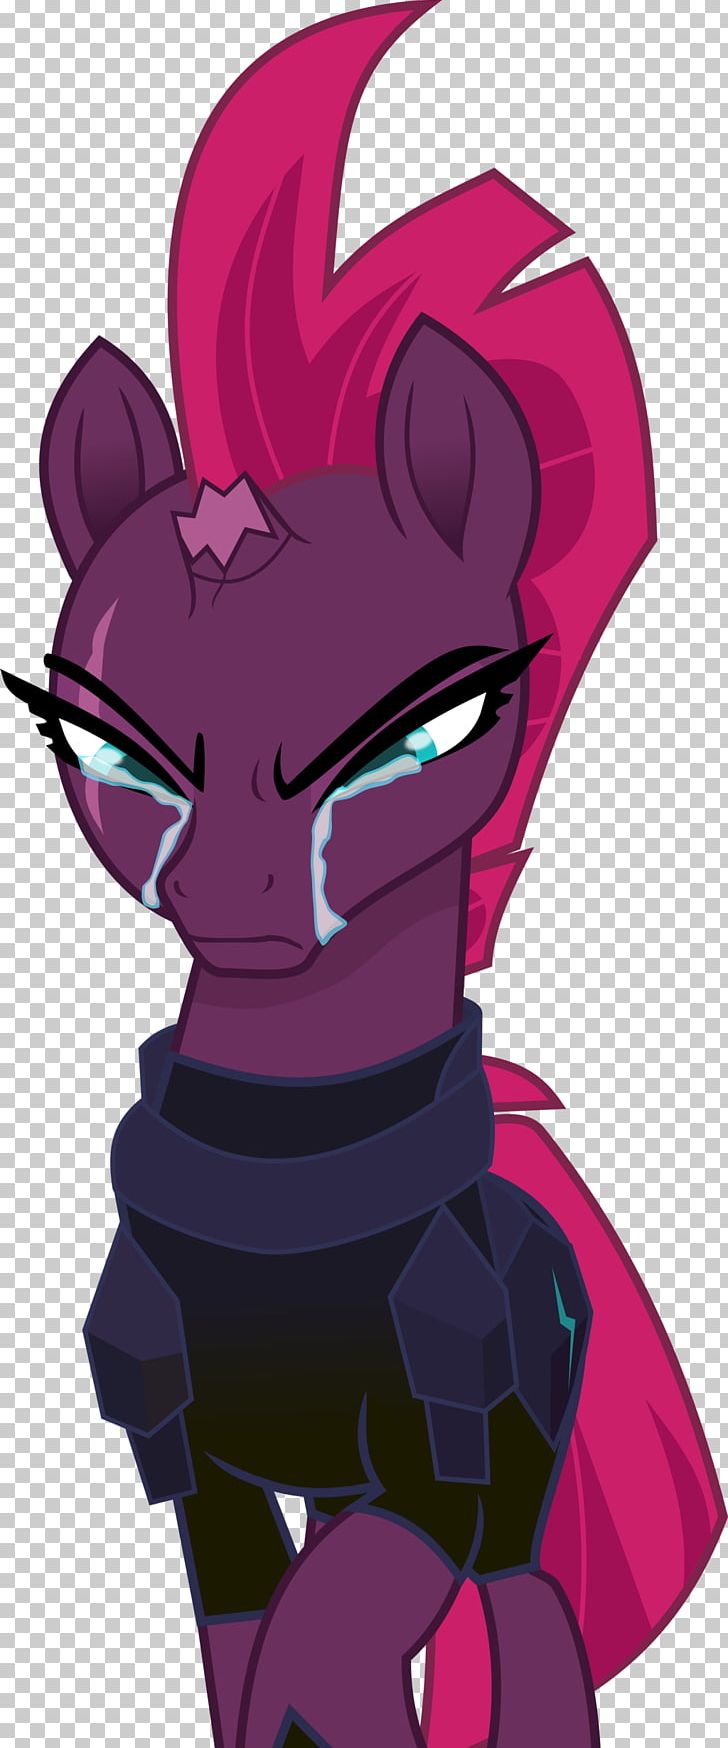 Rarity Tempest Shadow Twilight Sparkle Pinkie Pie Pony PNG, Clipart, Art, Cartoon, Demon, Equestria, Fictional Character Free PNG Download